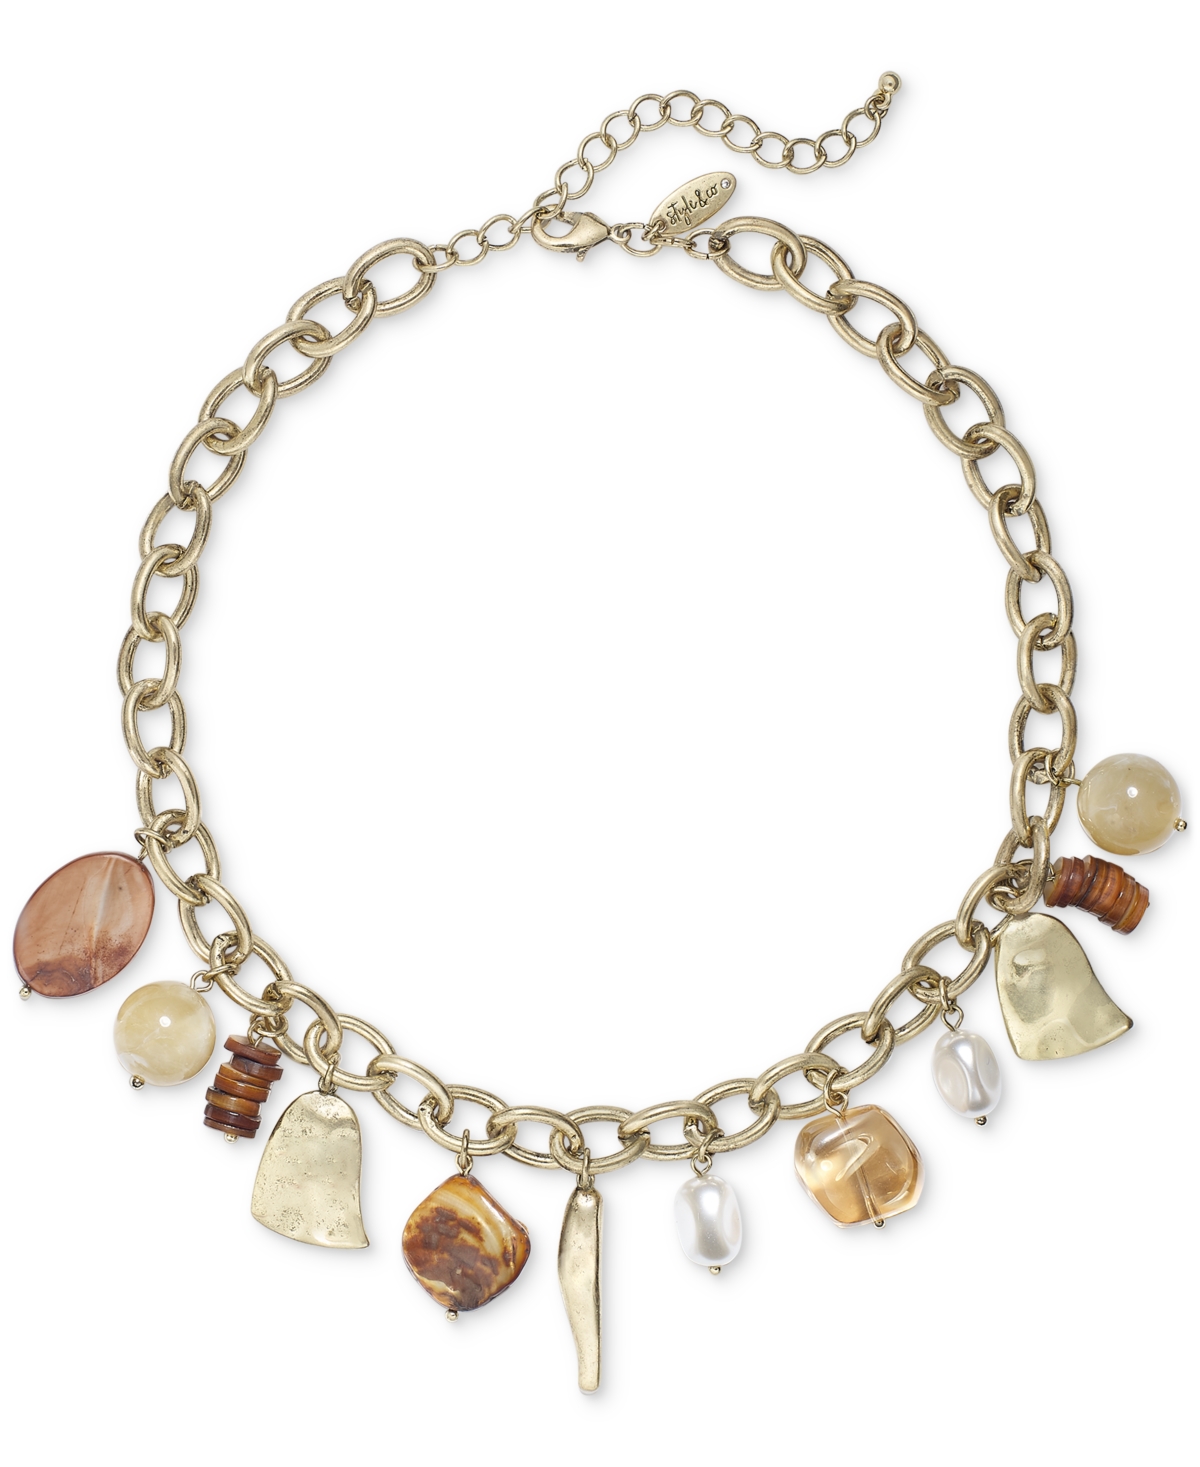 Mixed-Metal Beaded Charm Necklace, 17" + 3" extender, Created for Macy's - Brown